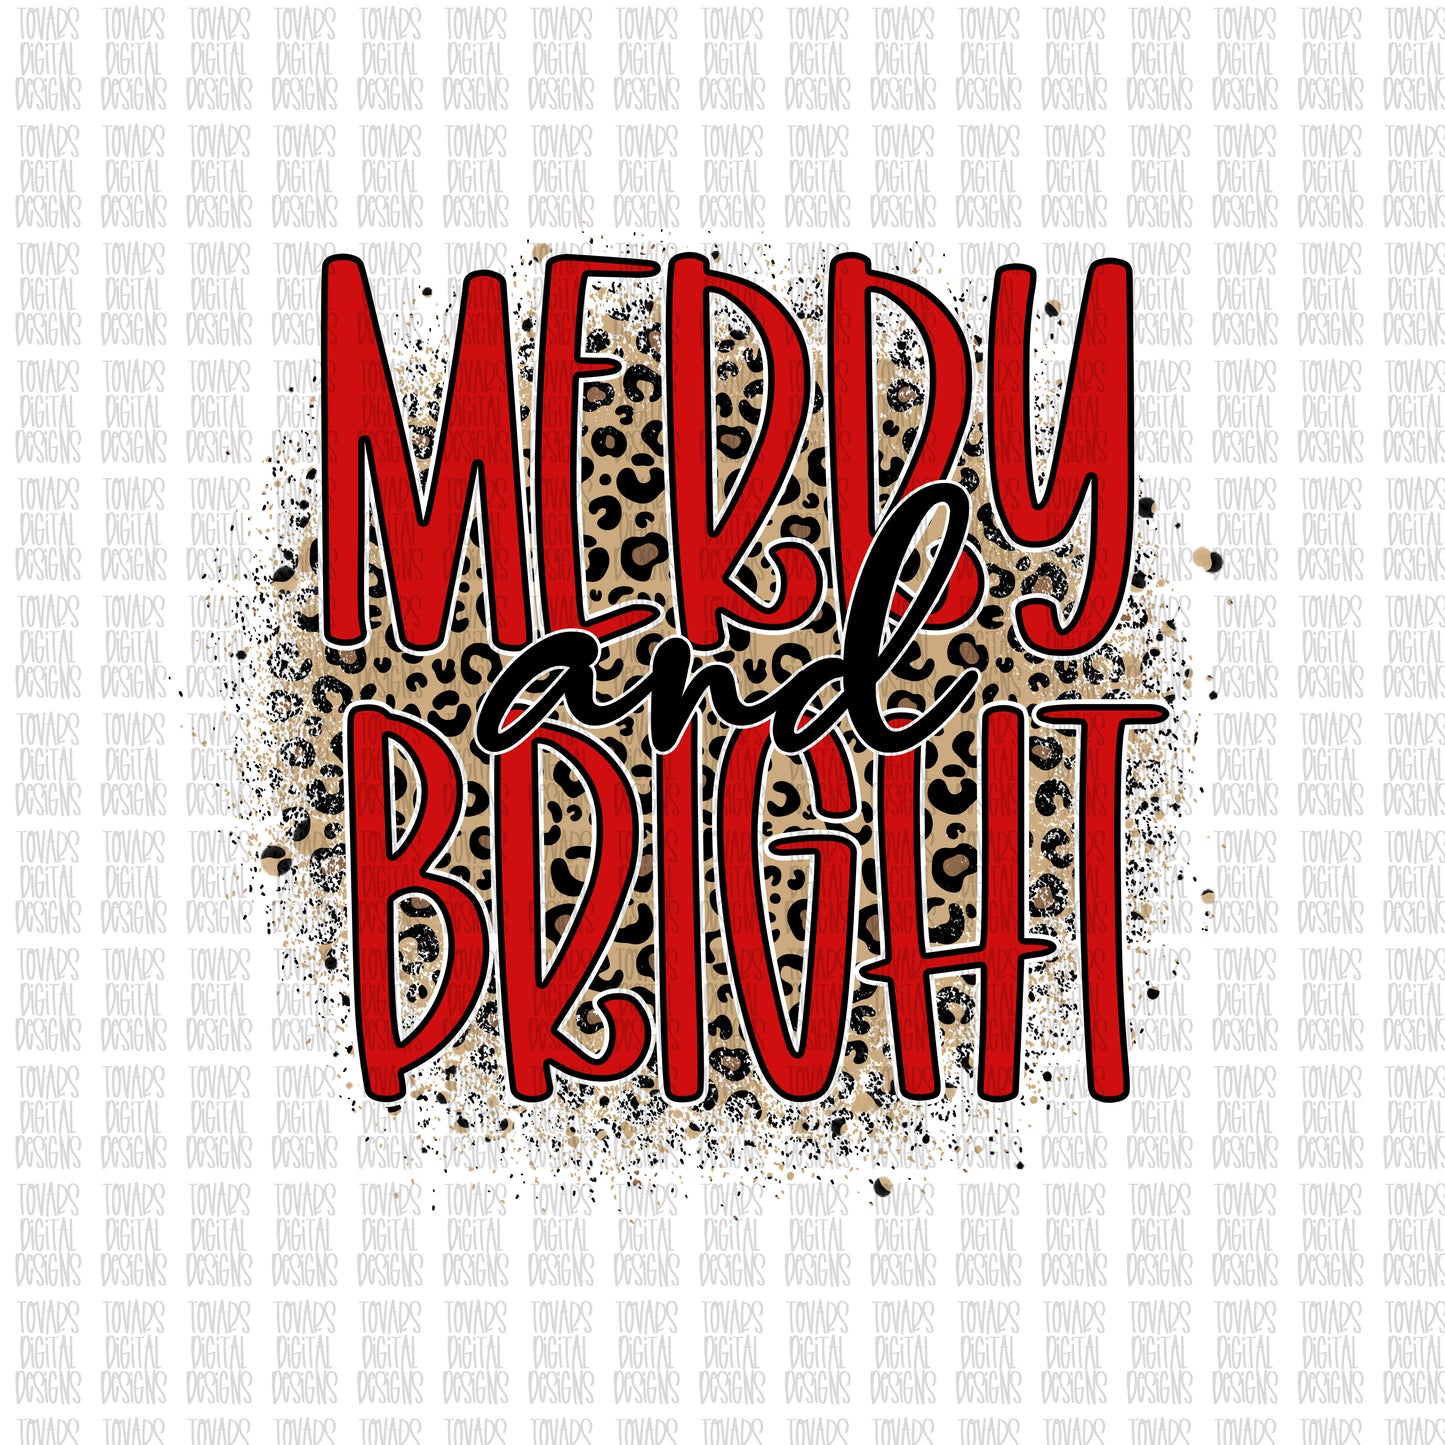 Merry and Bright leopard Png File, Merry and Bright leopard sublimation file, christmas sublimation, christmas leopard design, leopard png